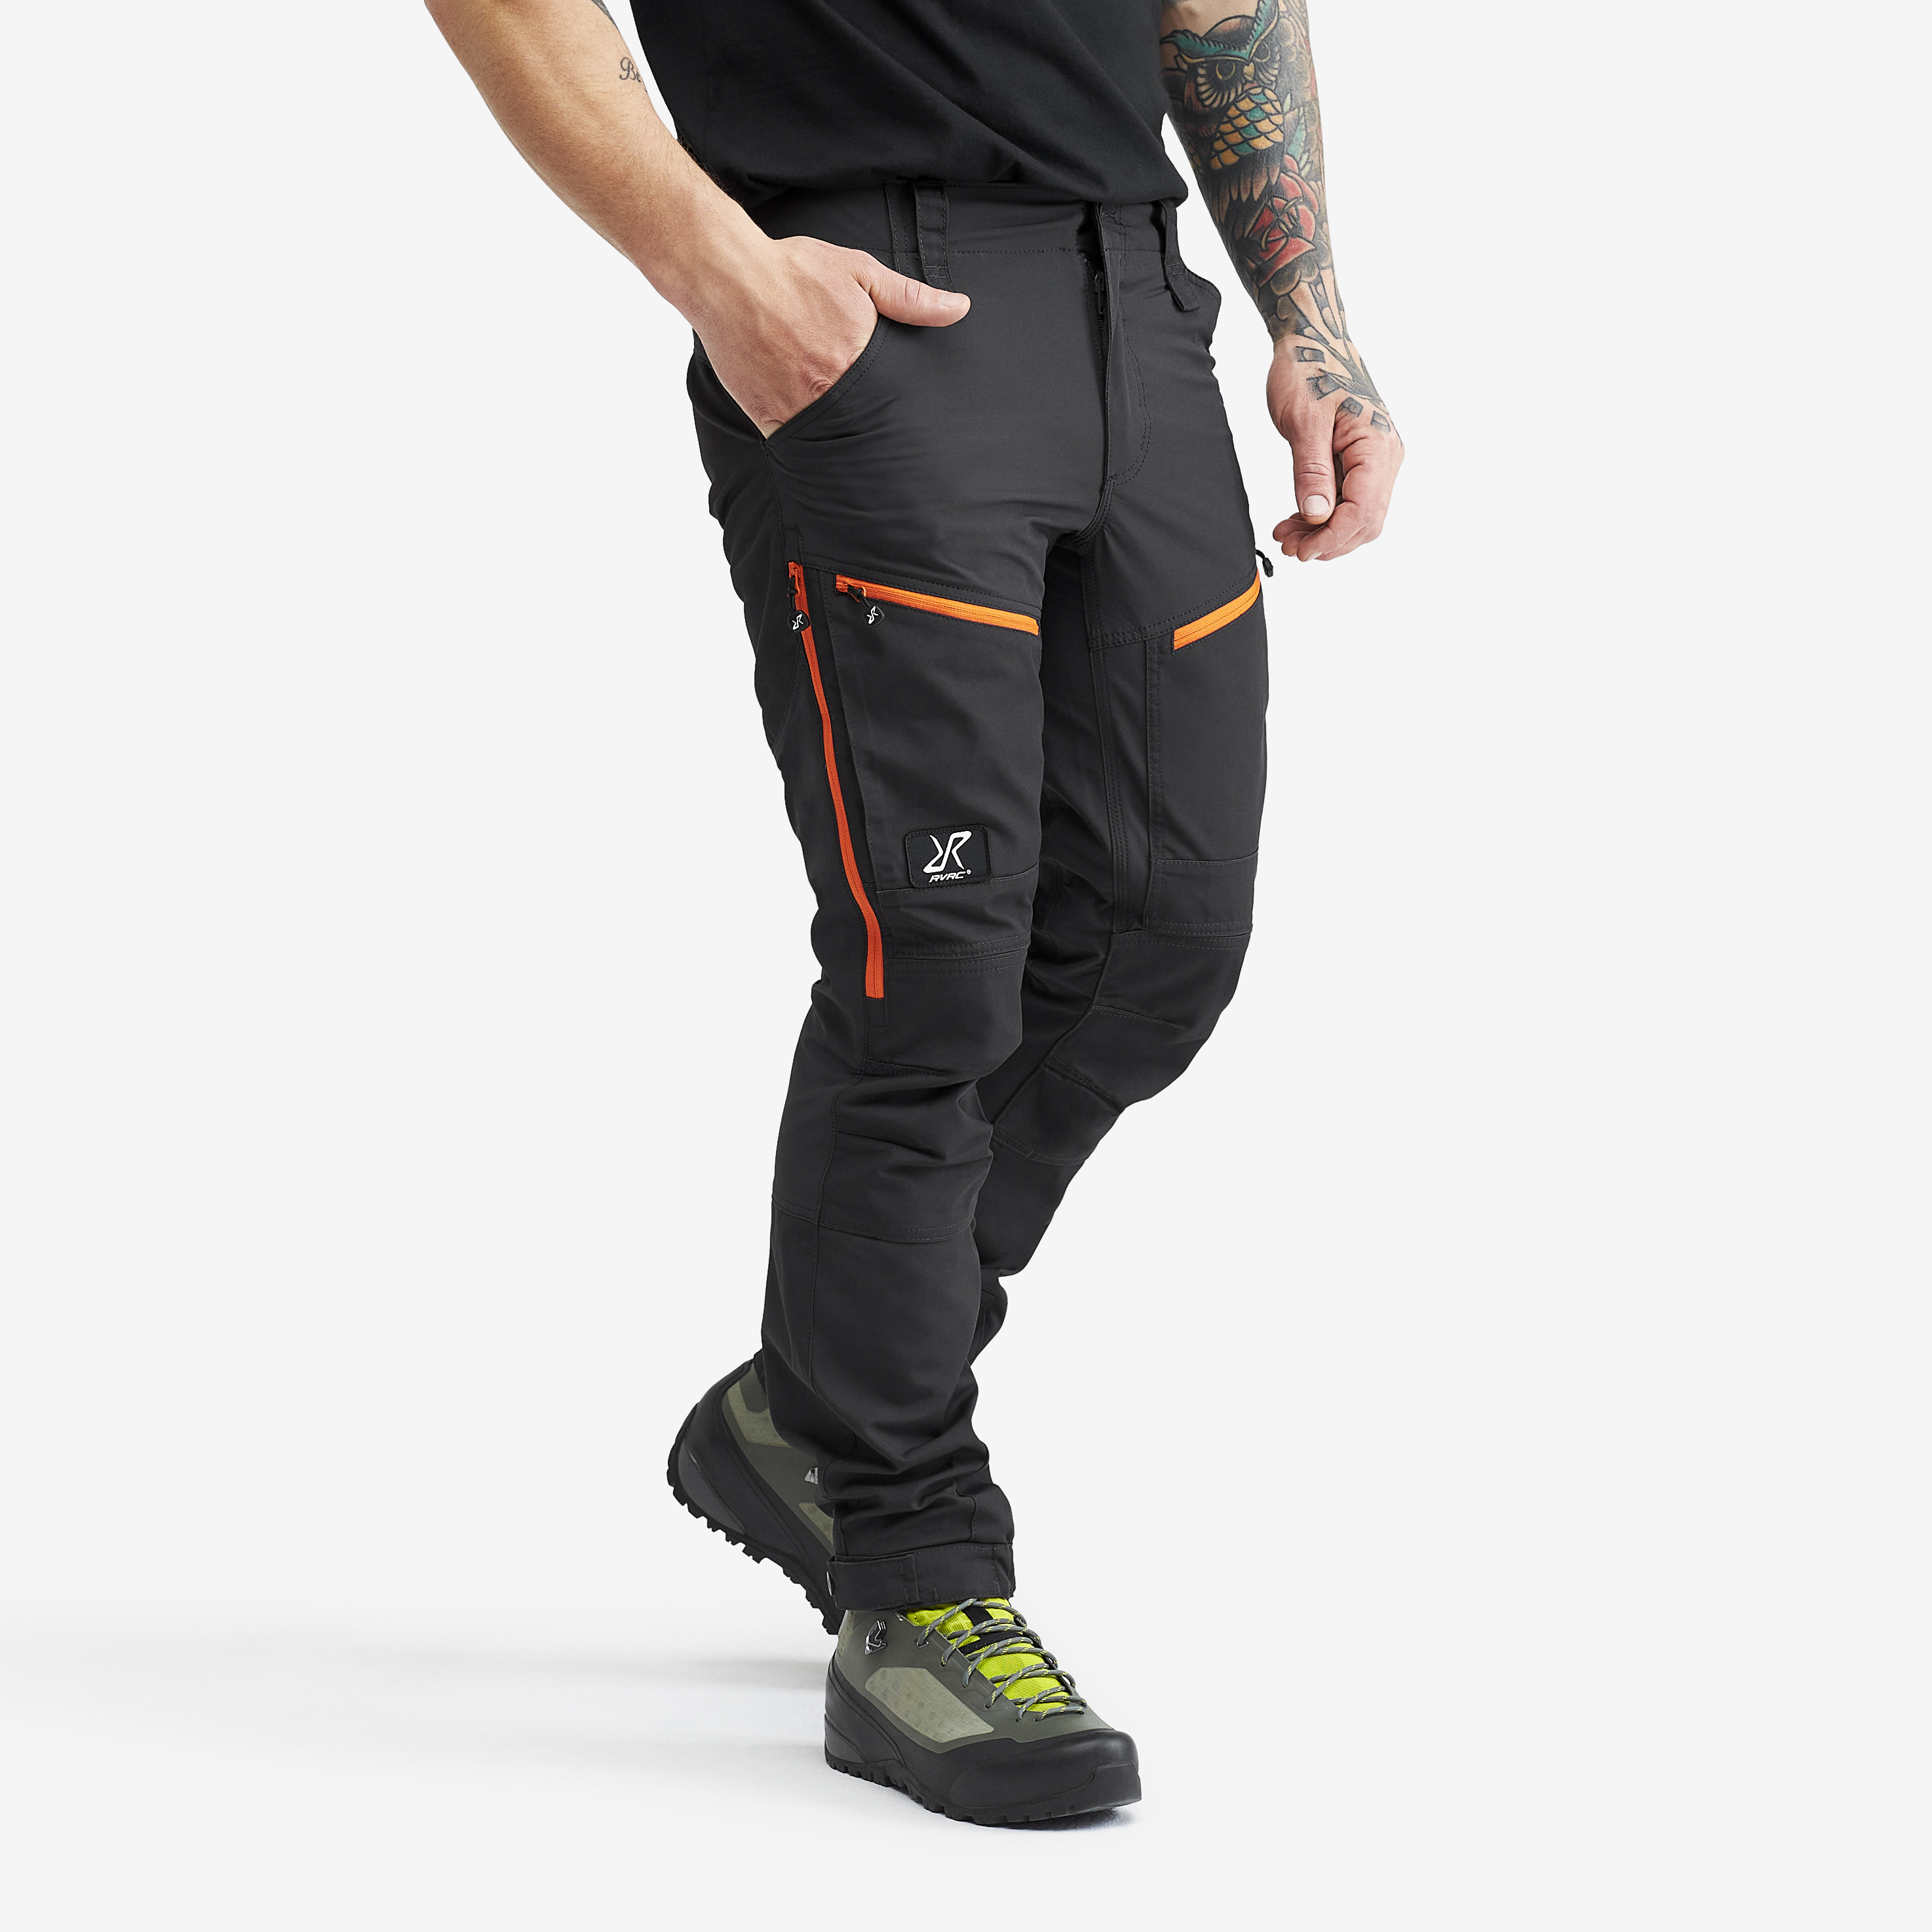 RevolutionRace - Have you tried our Hyper Pro Pants yet? They are